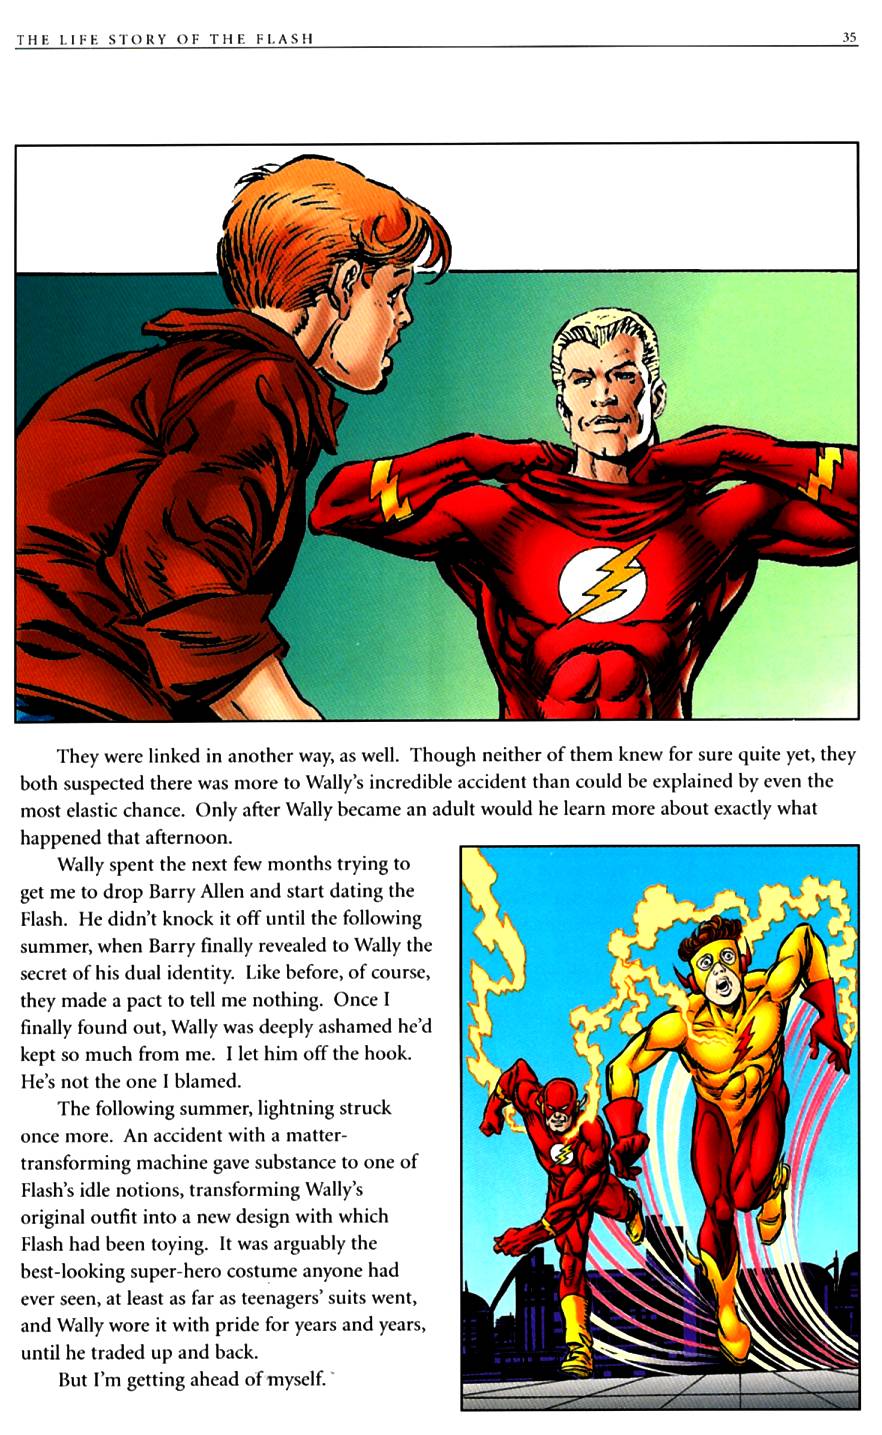 Read online The Life Story of the Flash comic -  Issue # Full - 37